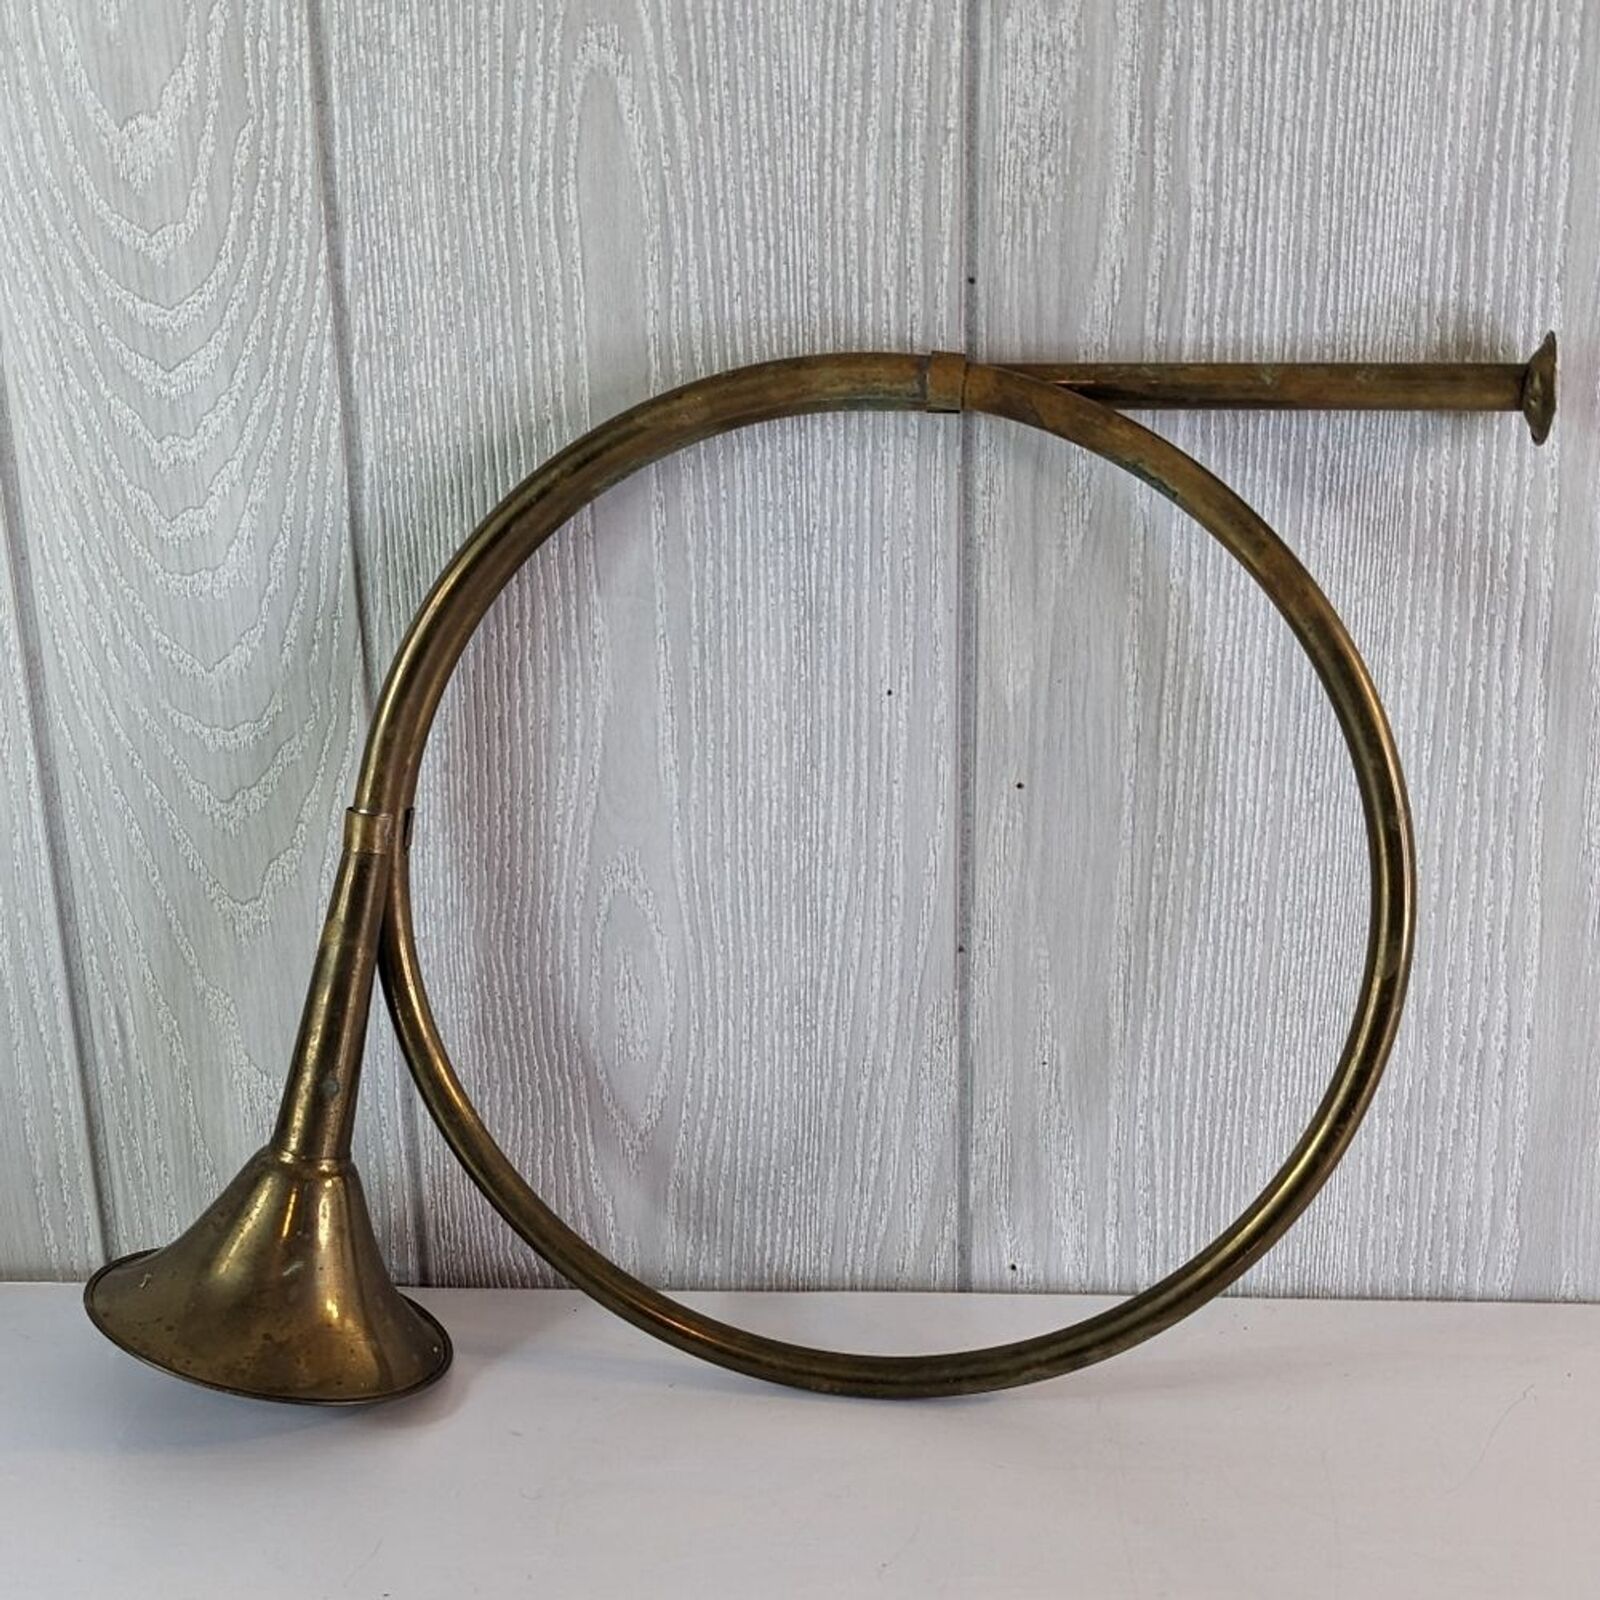 VTG Brass Hanging French Hunting Horn Wall Decor Made In India EUC